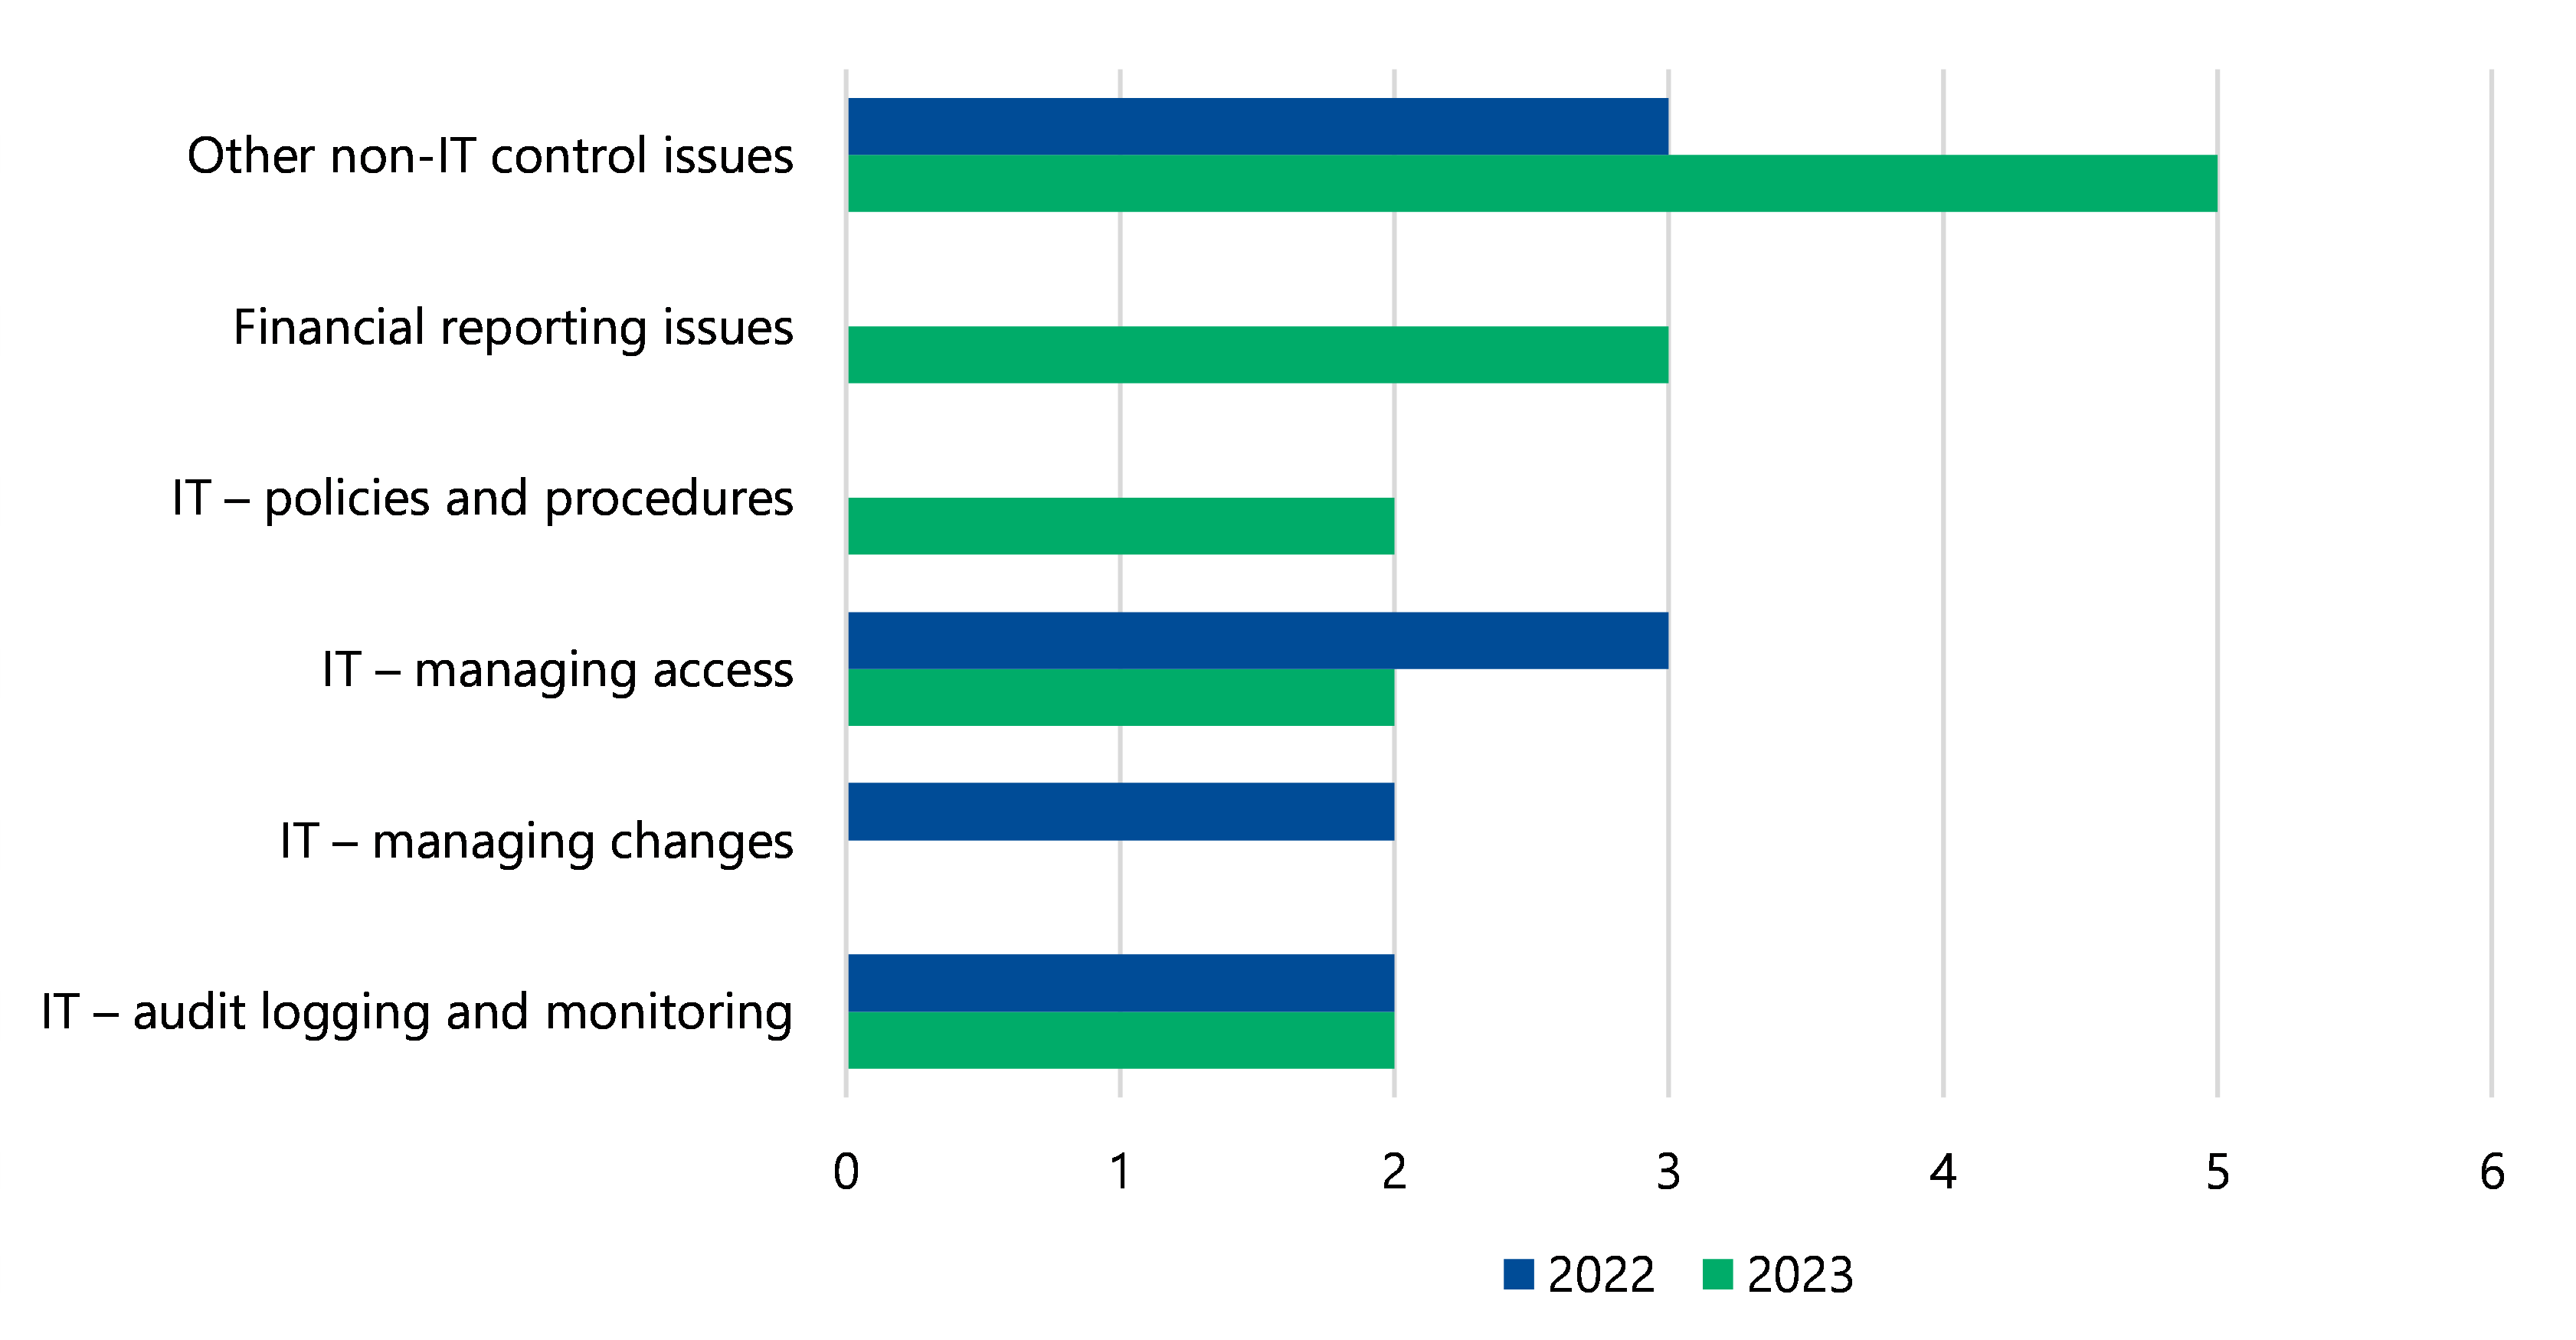 Figure 15 is a bar chart that shows IT audit logging and monitoring was 2 in 2022 and 2023; IT managing changes was 2 in 2022 (no data given for 2023); IT managing access was 3 in 2022 and 2 in 2023; IT policies and procedures was 2 in 2023 (no data given for 2022); financial reporting issues was 3 in 2023 (no data given for 2022); and other non-IT control issues was 3 in 2022 and 5 in 2023.